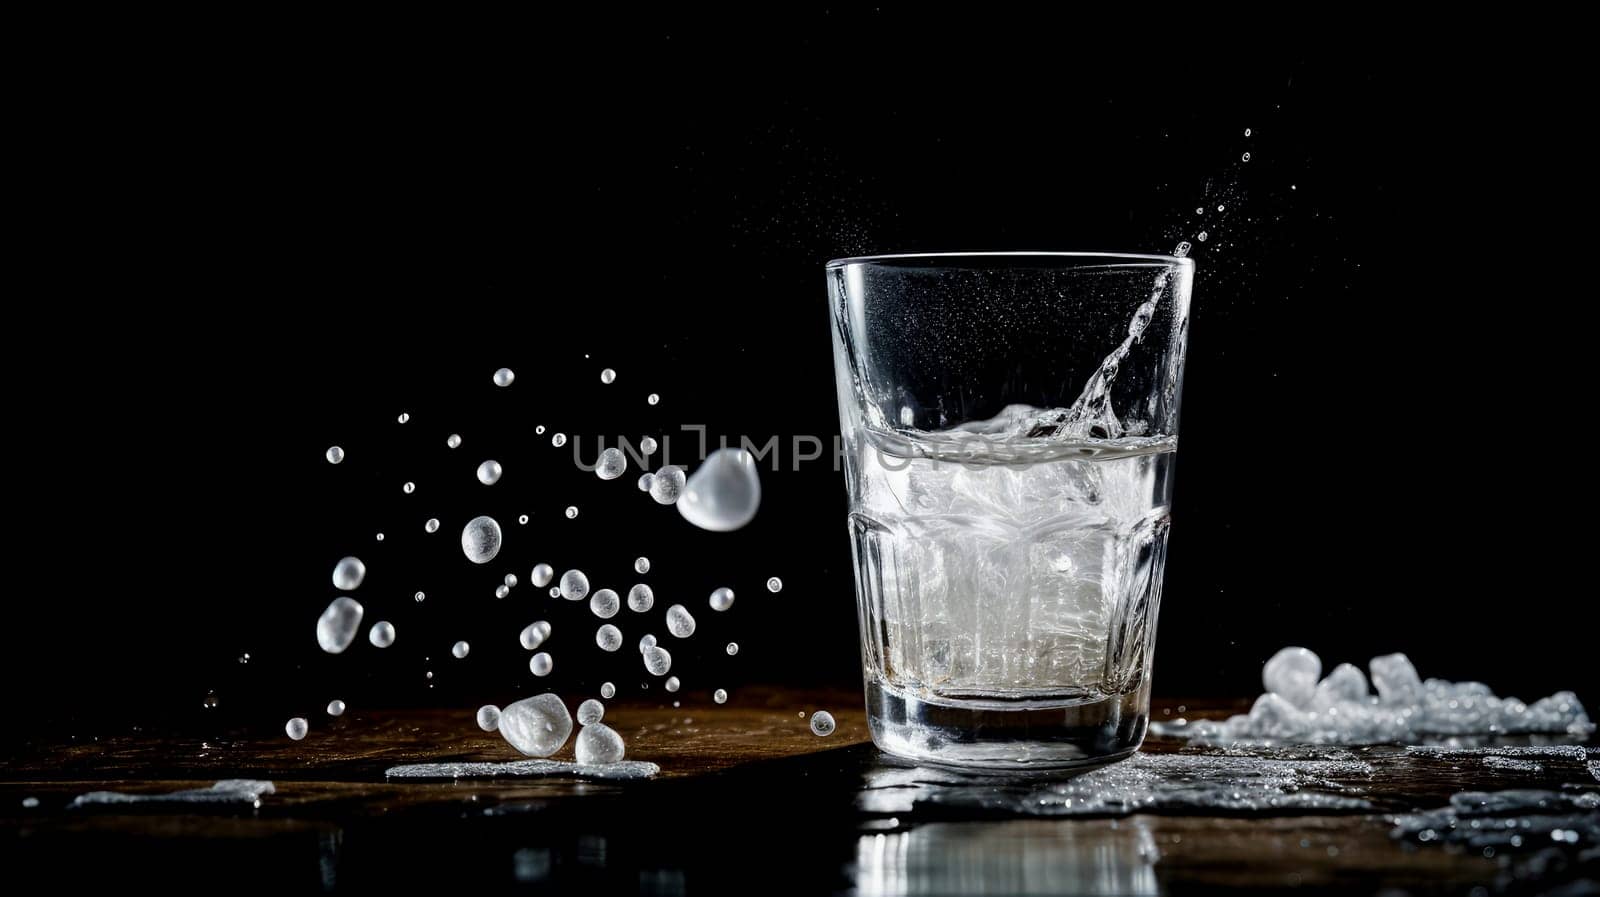 An aspirin tablet is dissolved in a glass of water. by Alla_Yurtayeva